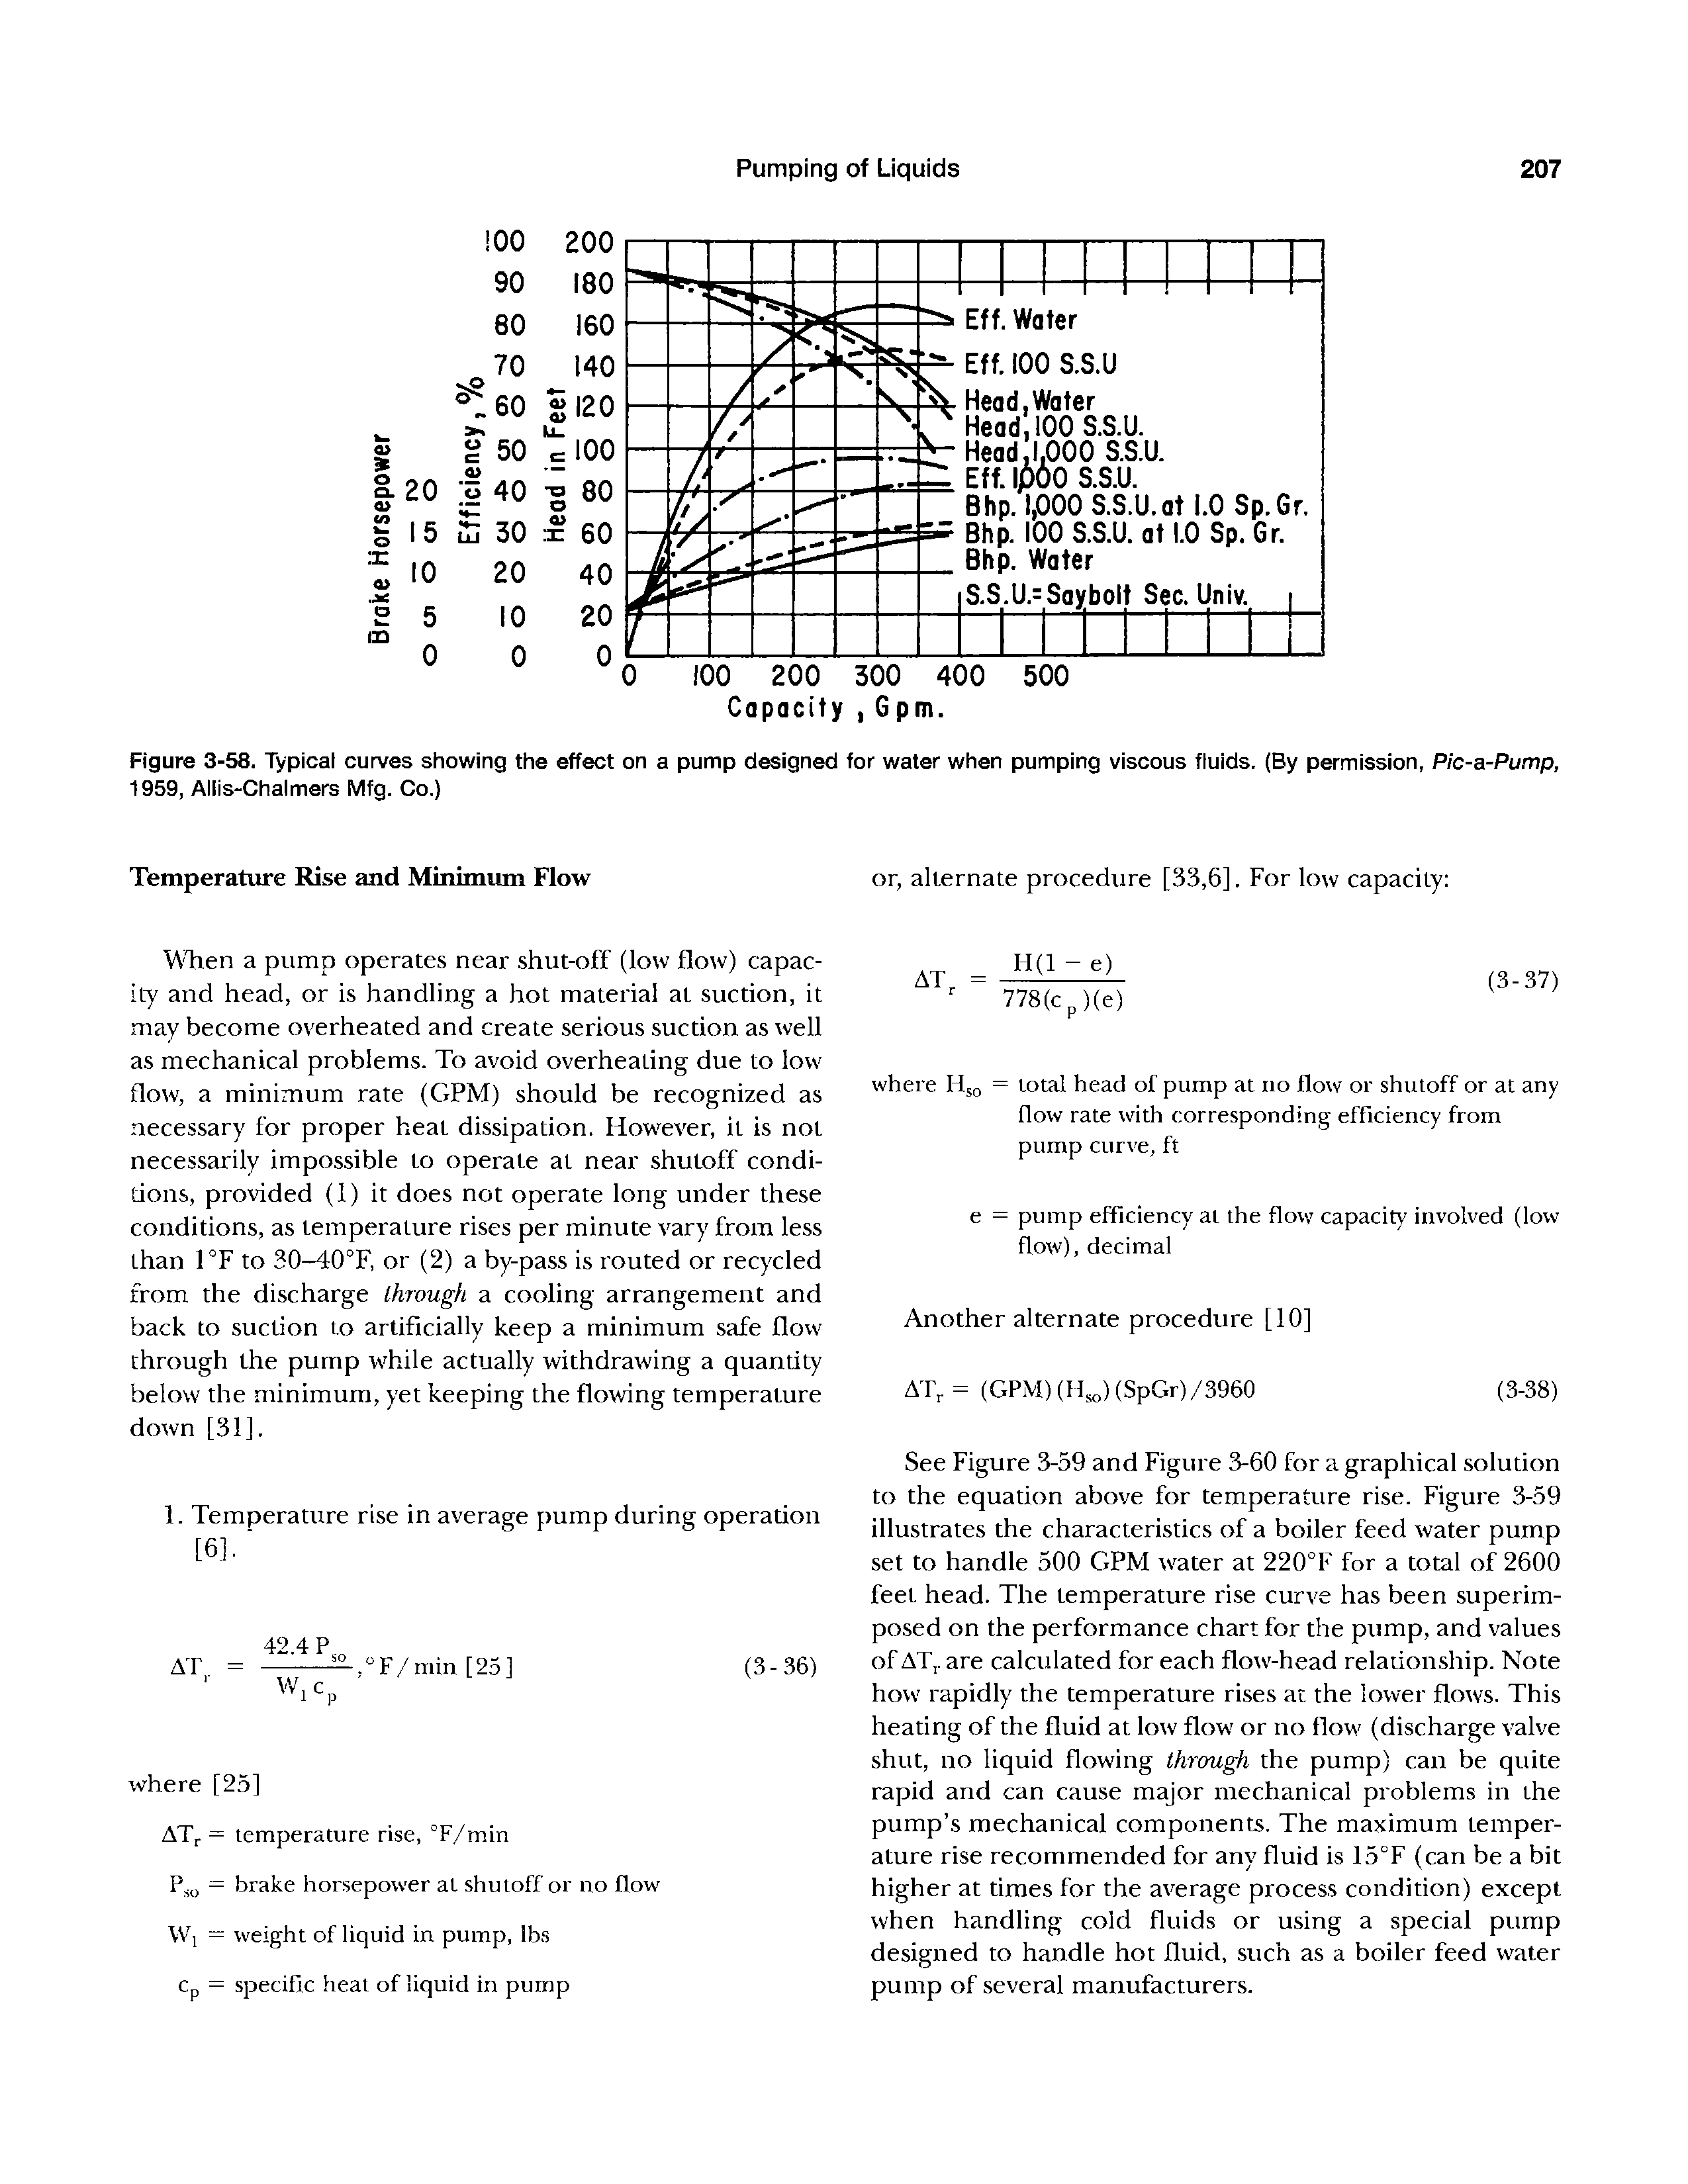 Figure 3-58. Typical curves showing the effect on a pump designed for water when pumping viscous fluids. (By permission, Pic-a-Pump, 1959, Aliis-Chalmers Mfg. Co.)...